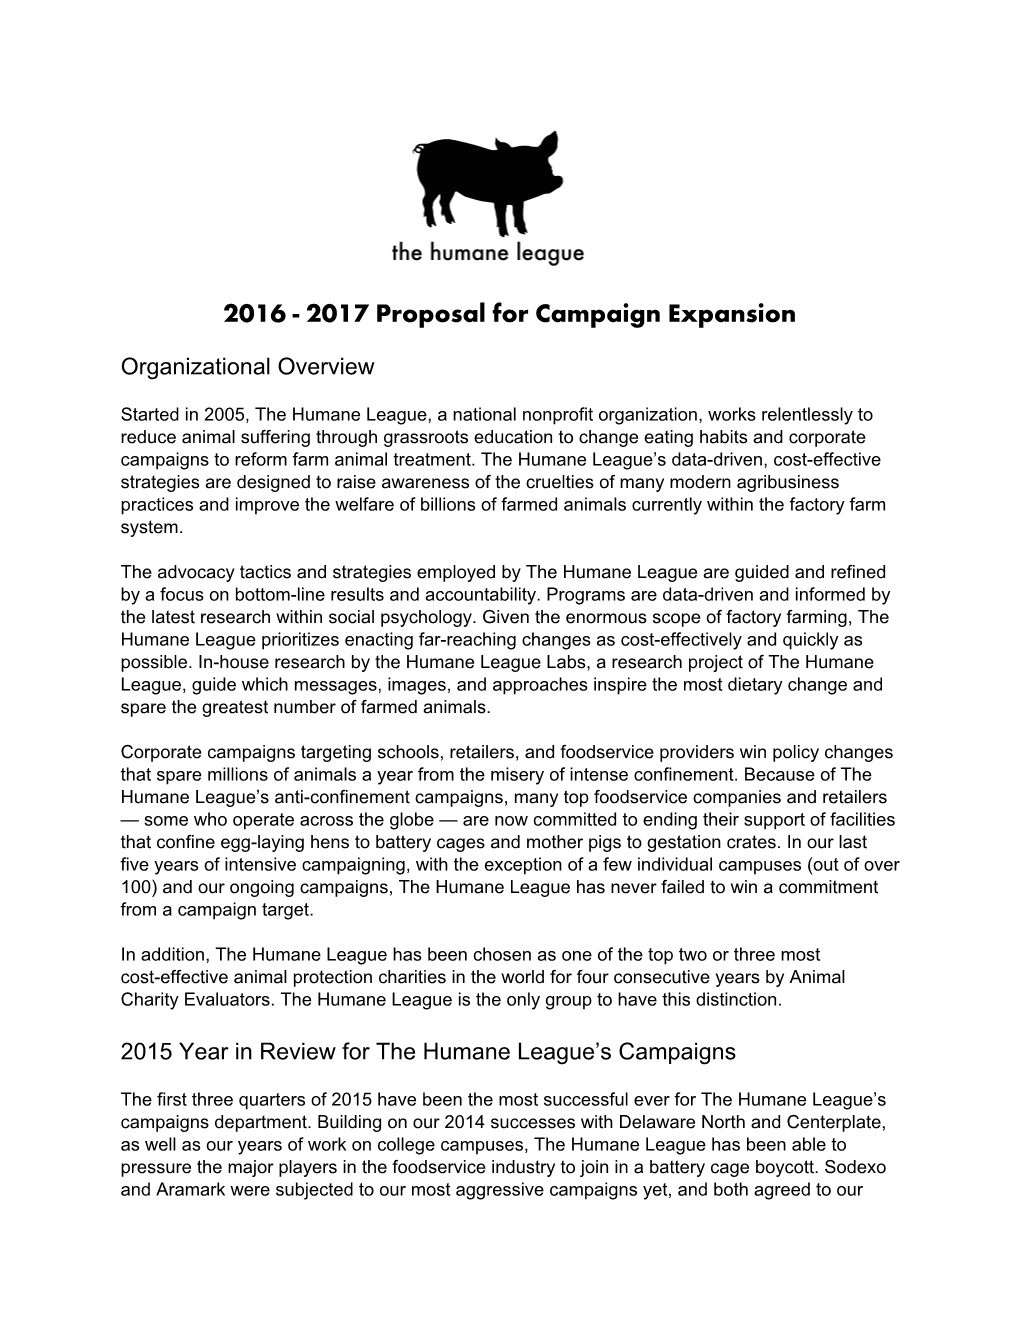 2017 Proposal for Campaign Expansion